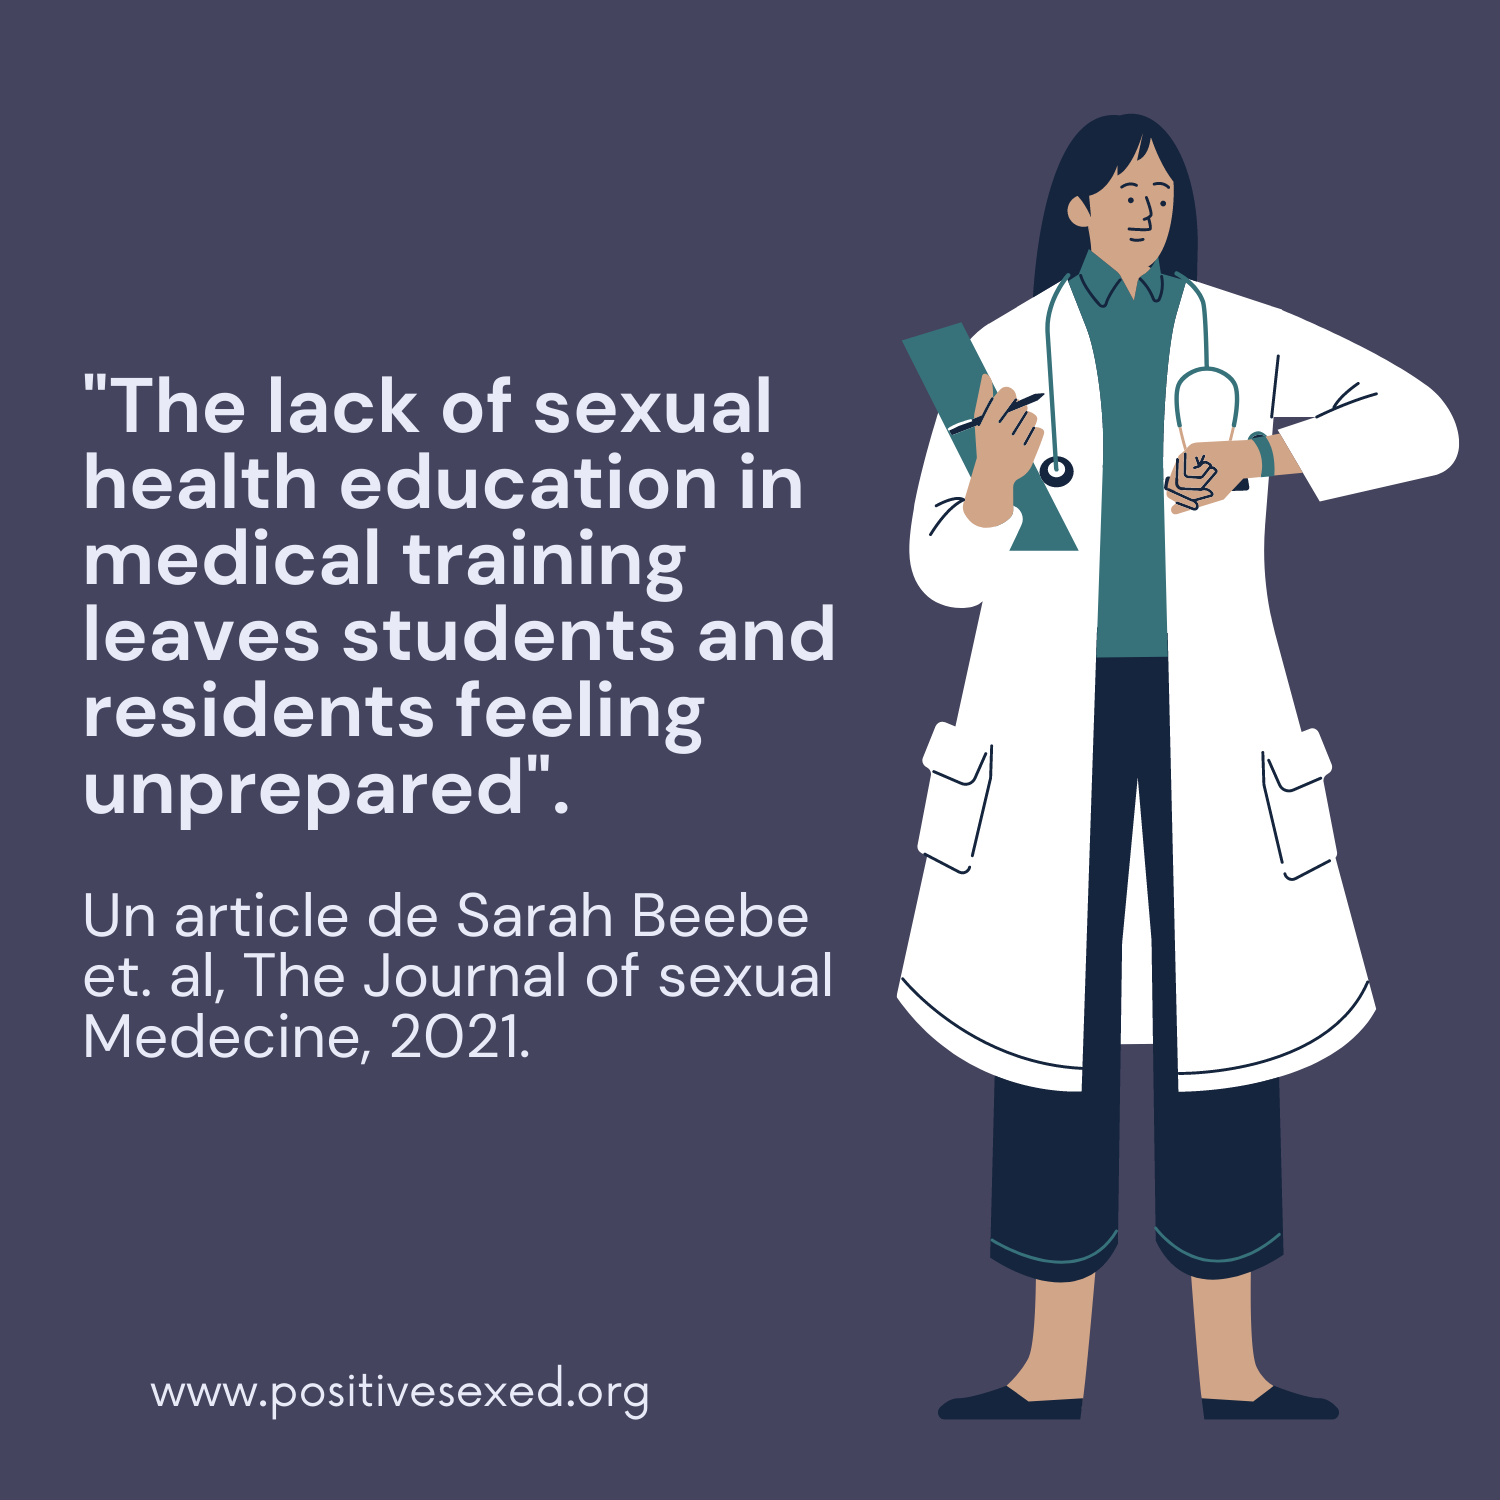 From Sarah Beebe et al., The Journal of Sexual Medecine, 2021